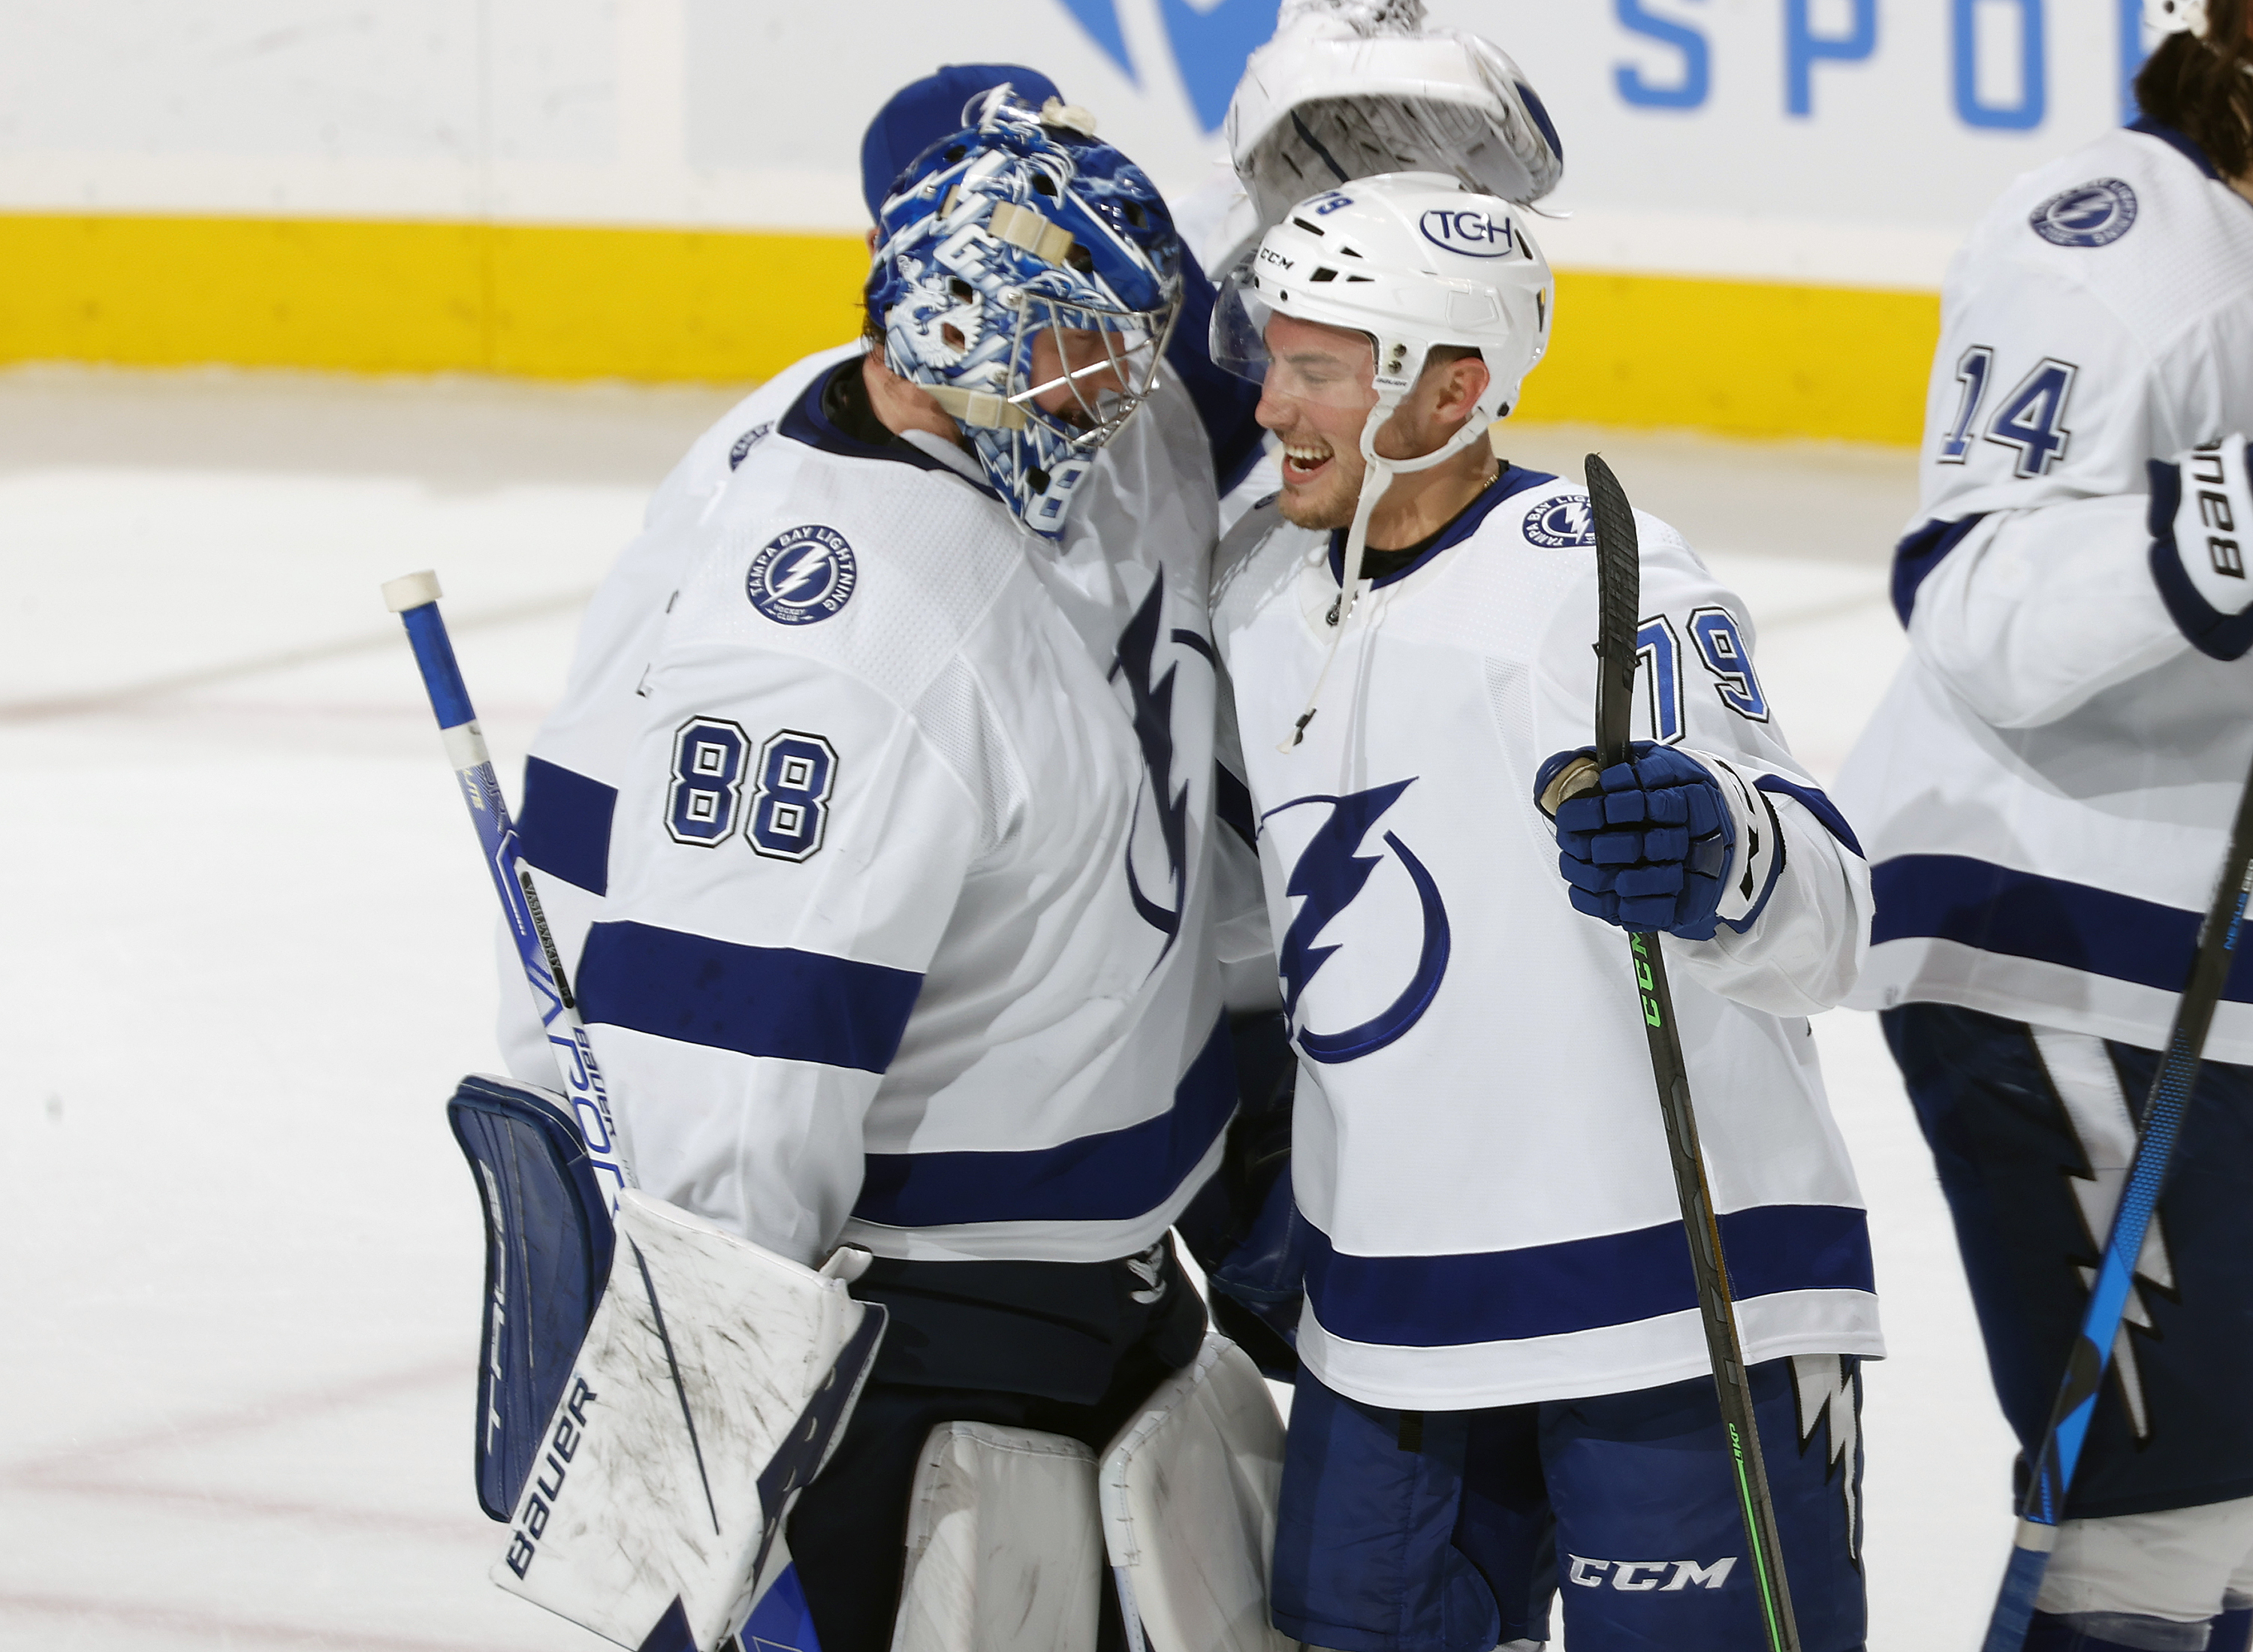 Goaltender Andrei Vasilevskiy #88 and Ross Colton #79 of the Tampa Bay Lightning celebrate the win against the Florida Panthers in Game Two of the Second Round of the 2022 NHL Stanley Cup Playoffs at the FLA Live Arena on May 19, 2022 in Sunrise, Florida. The Lightning defeated the Panthers 2-1.